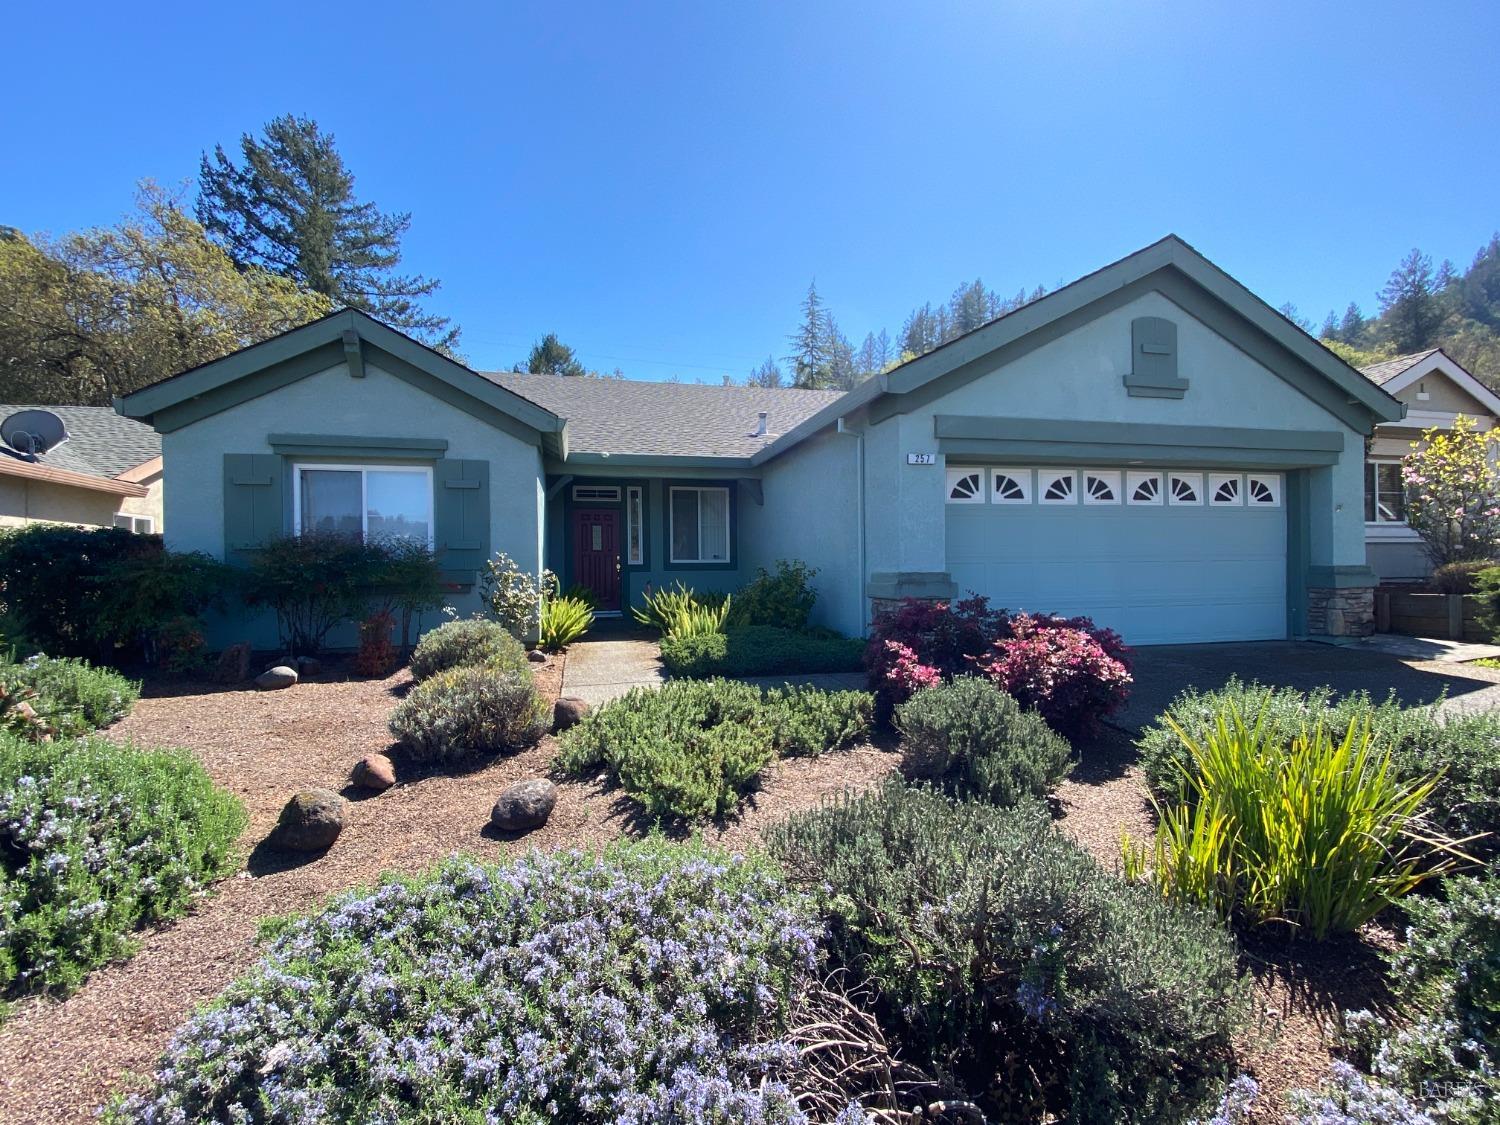 Photo of 257 Red Mountain Dr in Cloverdale, CA